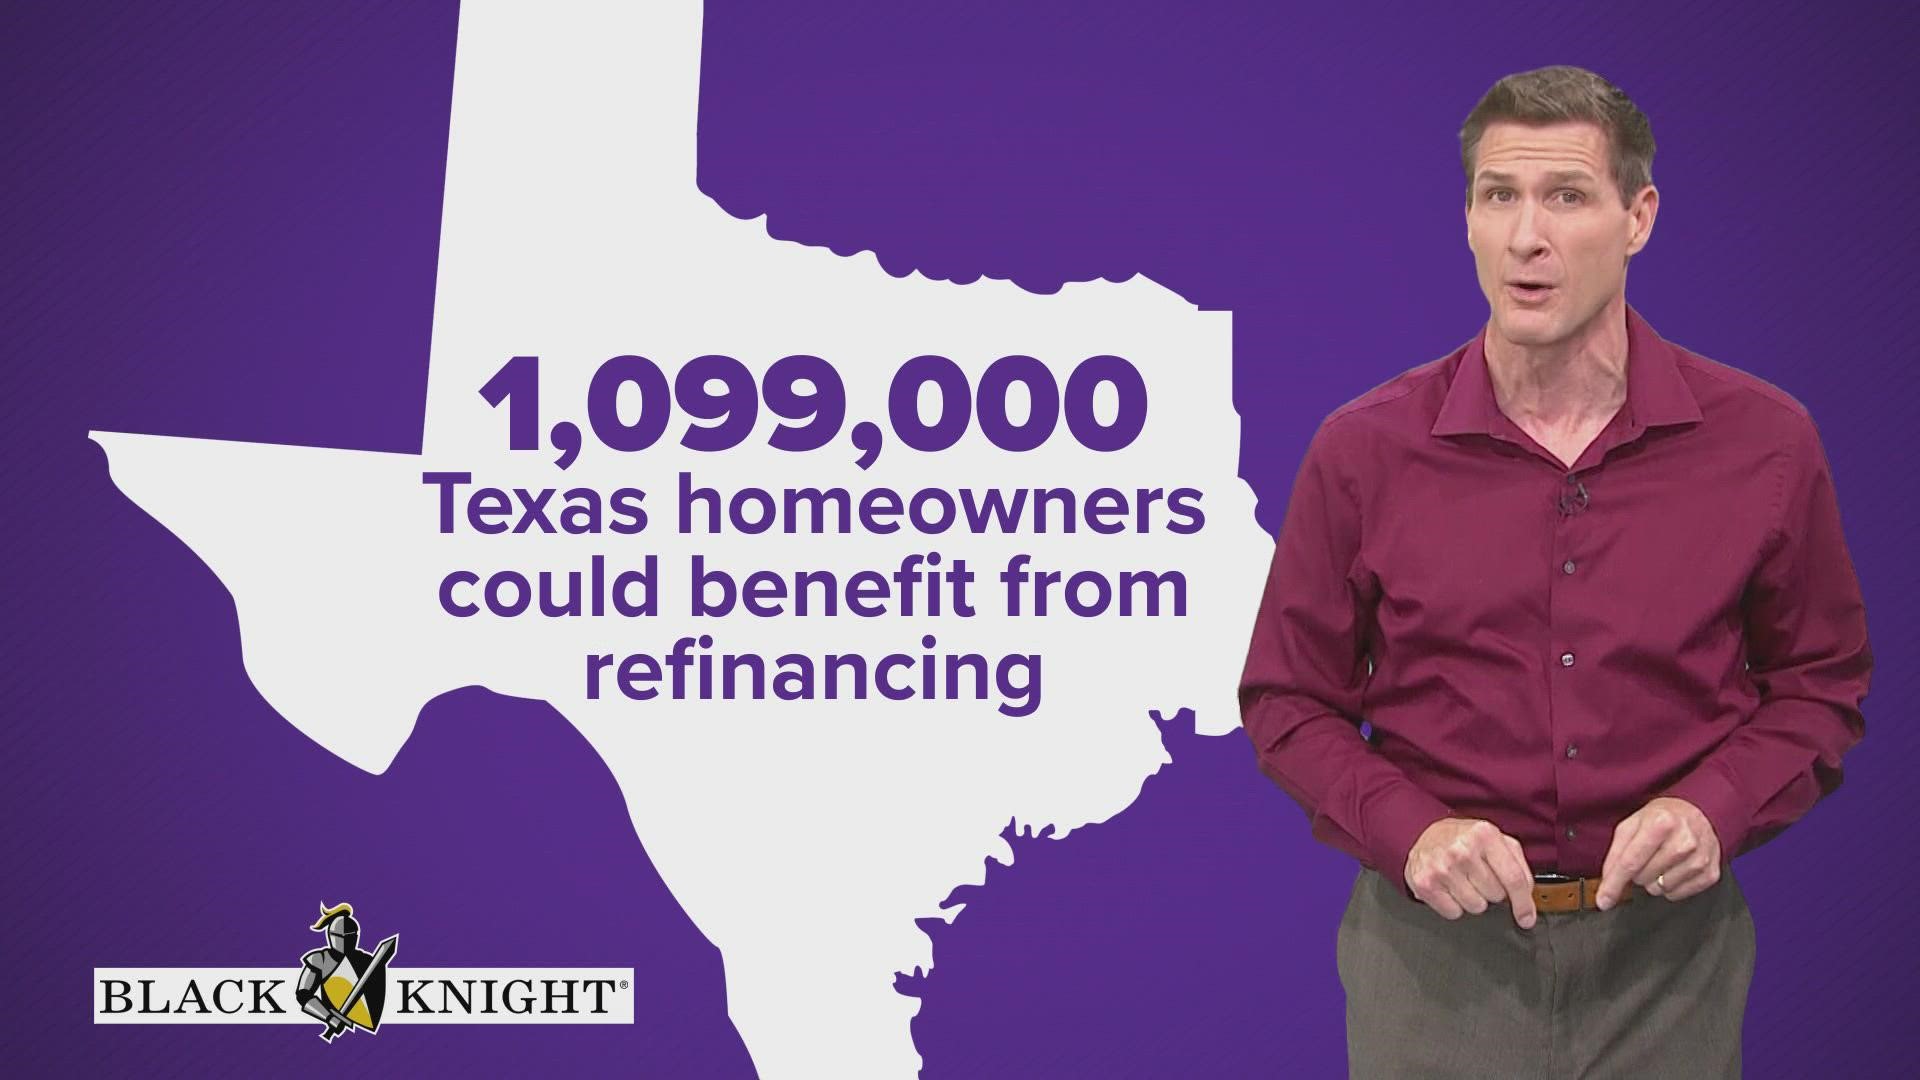 WFAA asked how many of those 15 million candidates who could benefit from refinancing are in Texas. The answer: 1,099,000 Texas homeowners